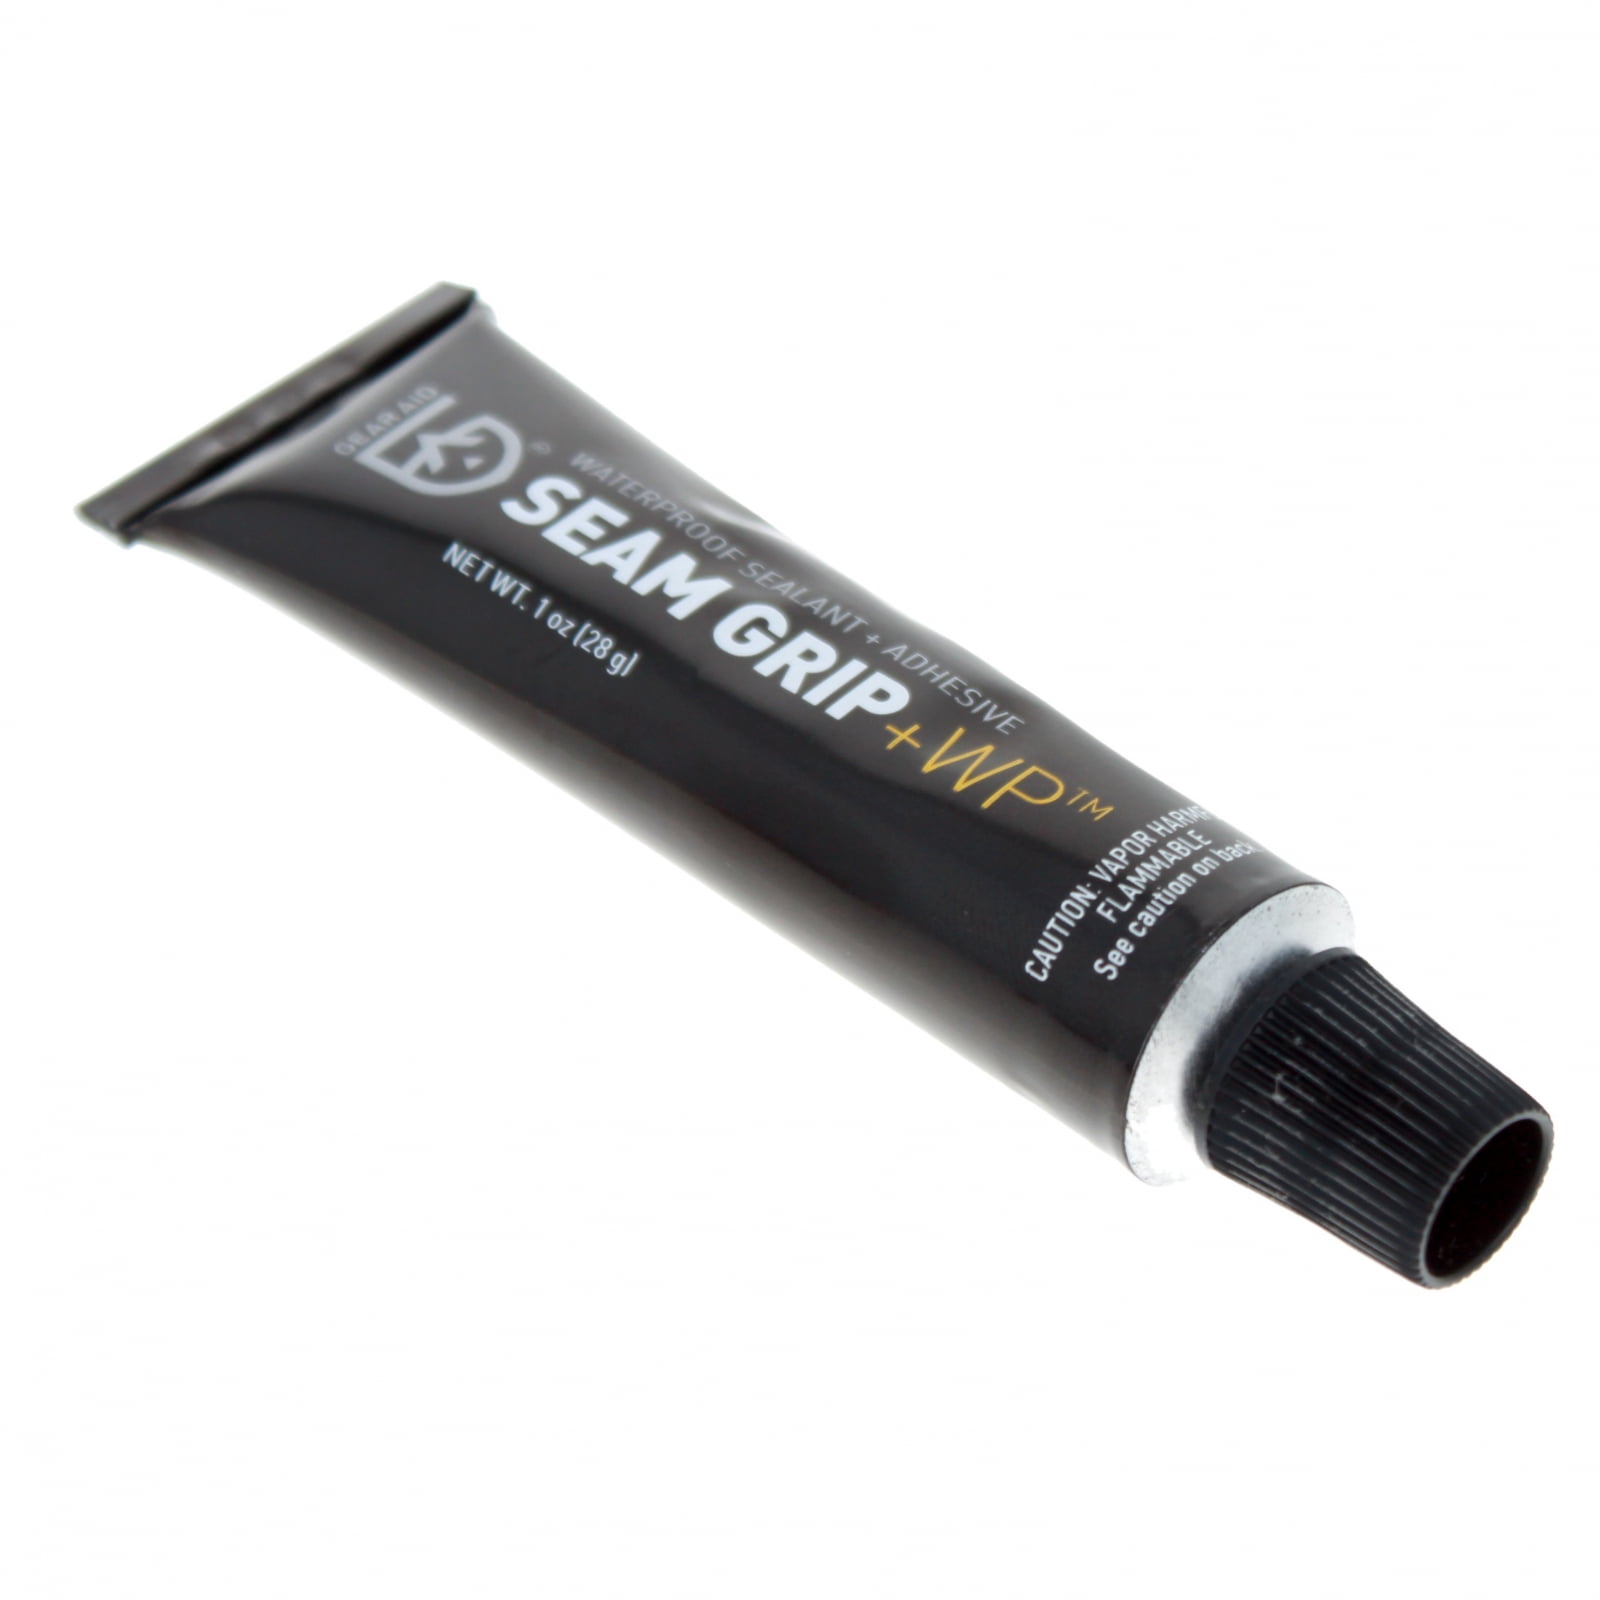 Gear Aid Seam Grip WP Waterproof Sealant Adhesive For Tents